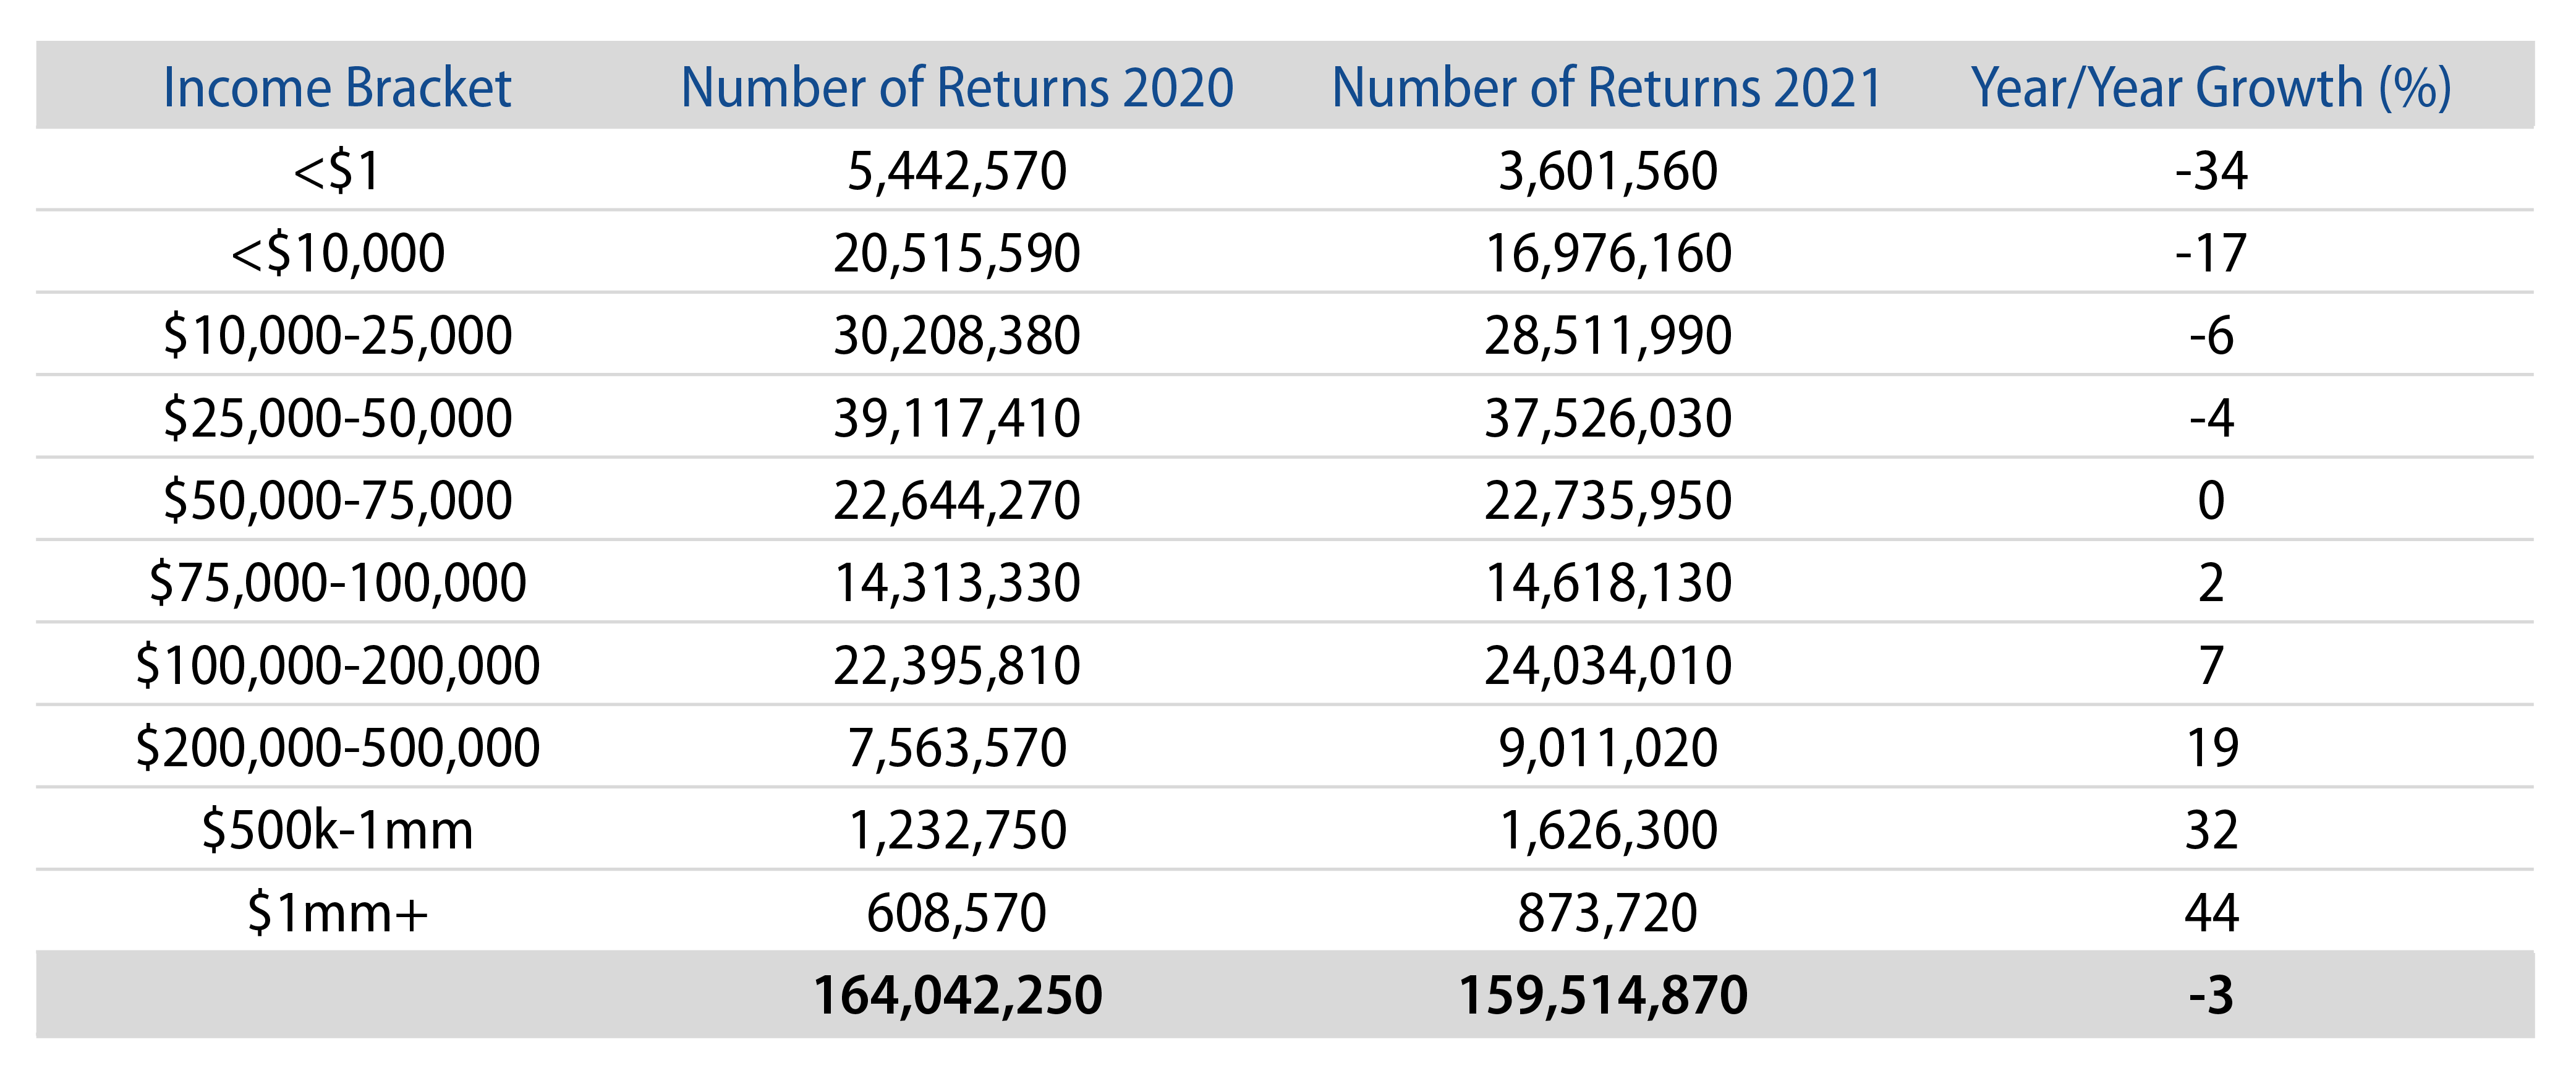 Explore Number of Returns by Tax Bracket, 2020 vs. 2021